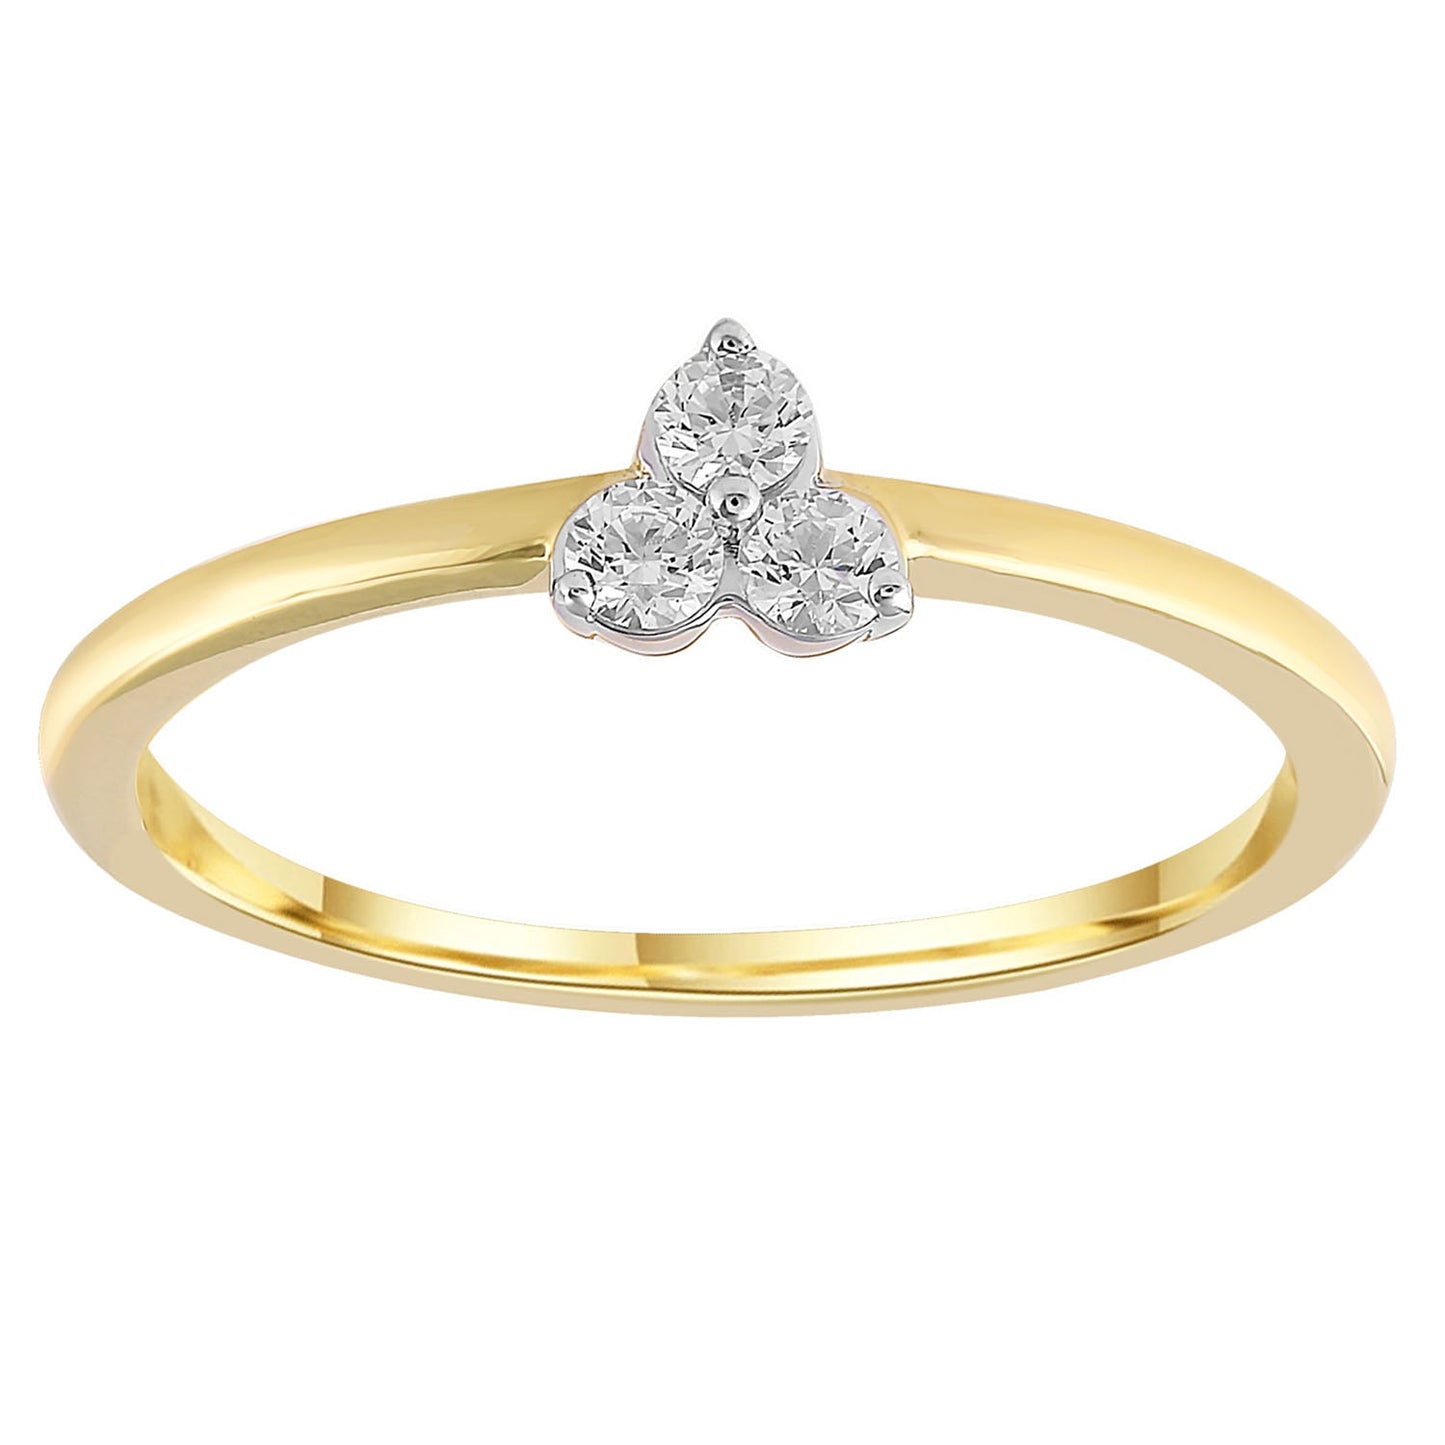 Ring with 0.15ct Diamond in 9K Yellow Gold